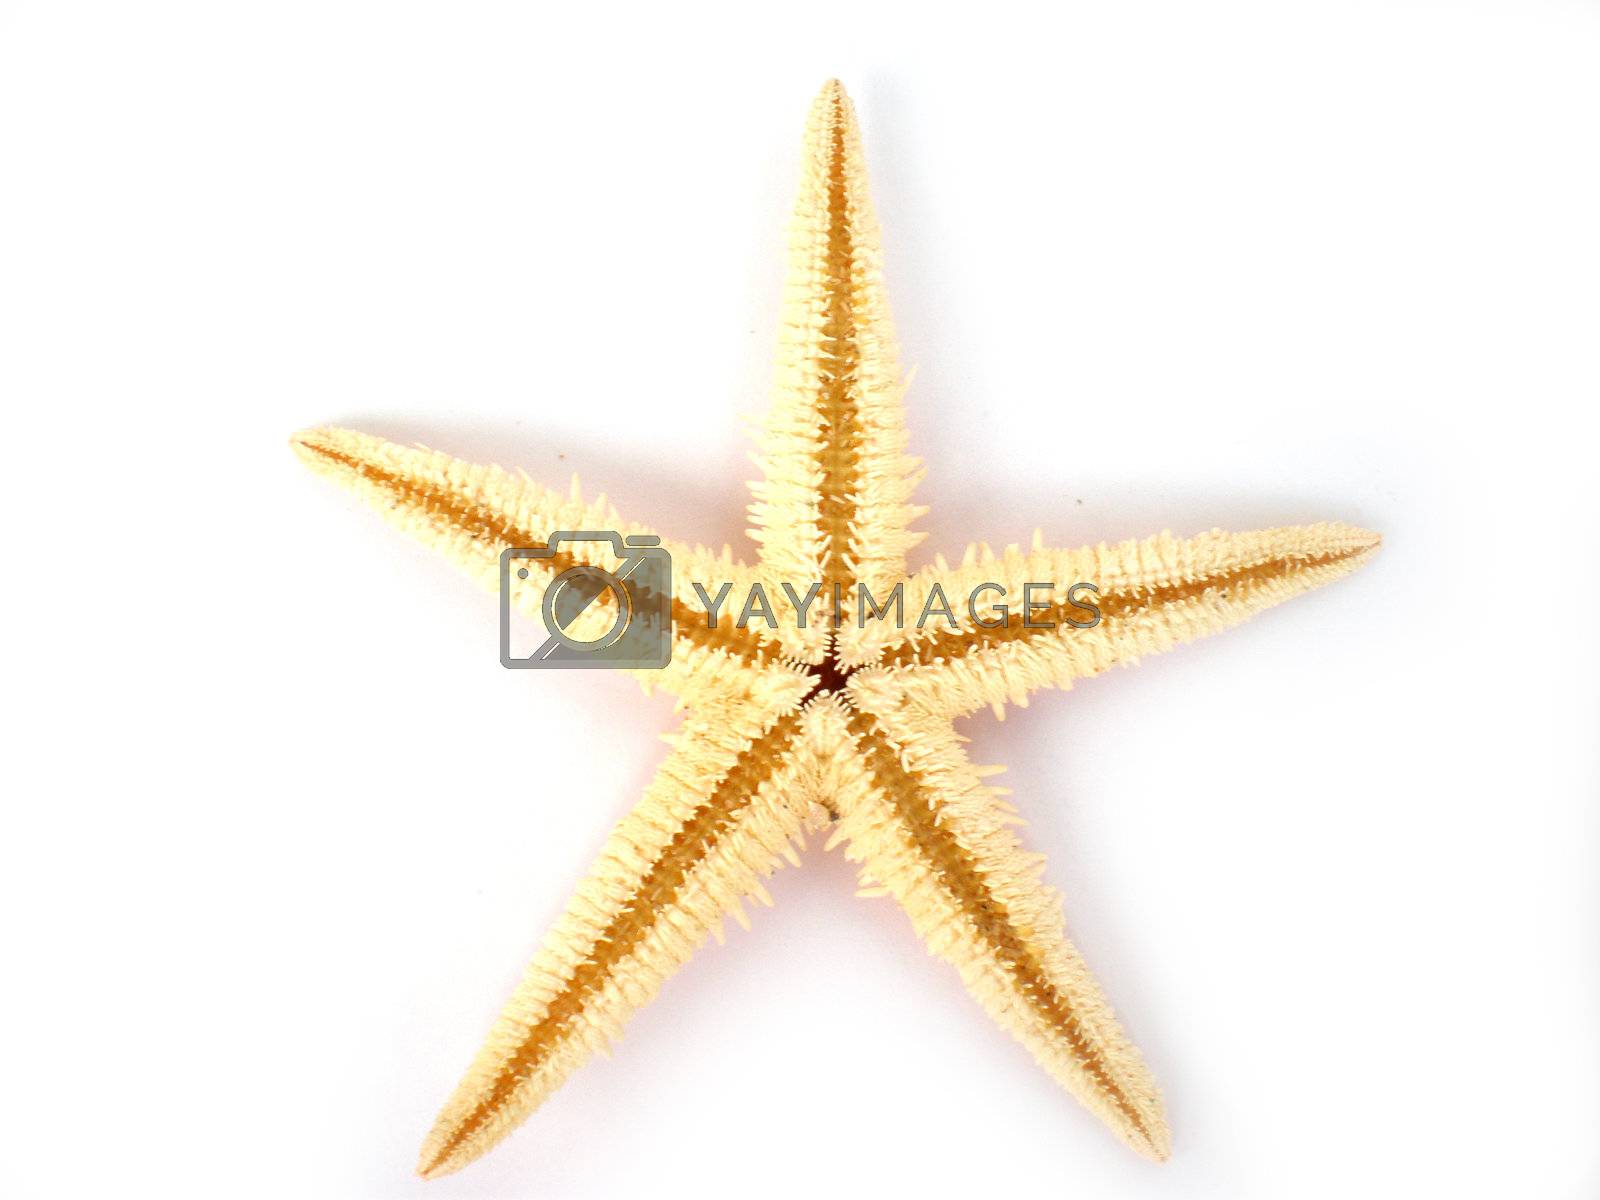 Royalty free image of starfish isolated on white background by Dessie_bg